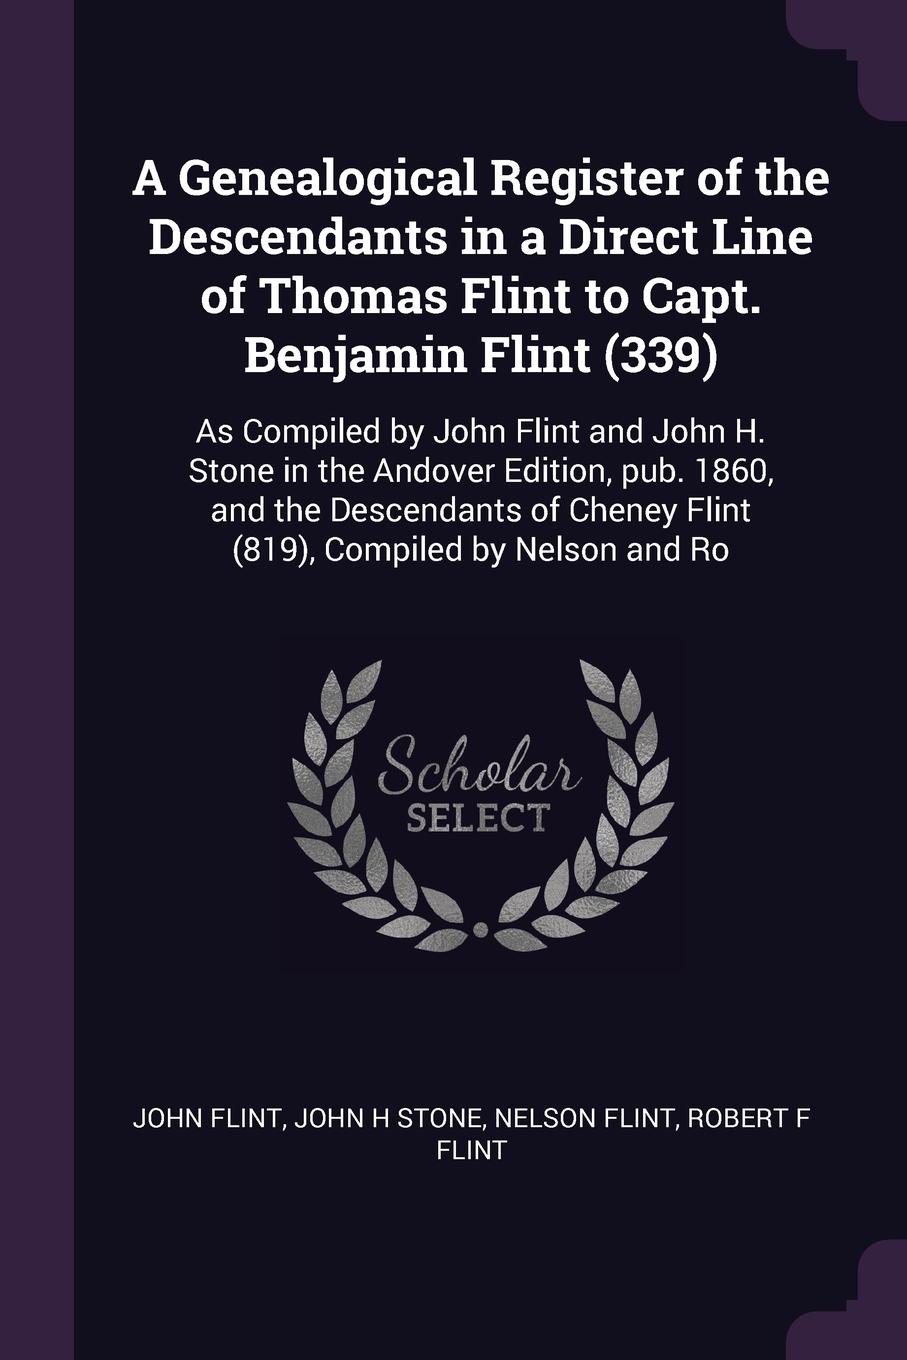 A Genealogical Register of the Descendants in a Direct Line of Thomas Flint to Capt. Benjamin Flint (339). As Compiled by John Flint and John H. Stone in the Andover Edition, pub. 1860, and the Descendants of Cheney Flint (819), Compiled by Nelson...